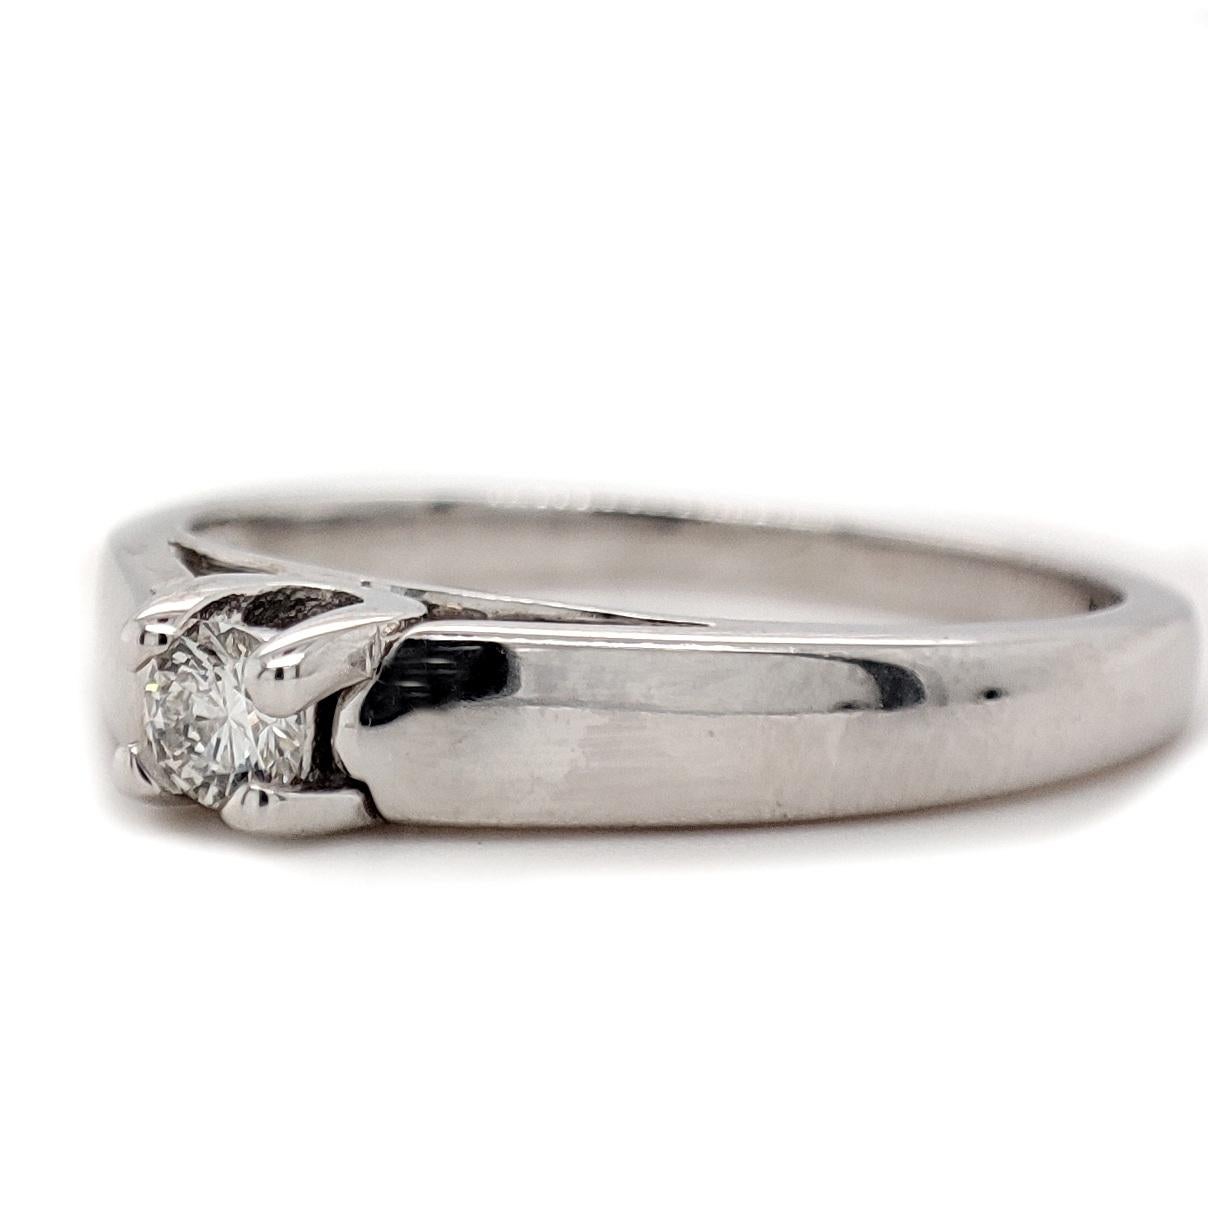 FOR US CUSTOMER NO VAT!

Embark on a journey of everlasting love with this enchanting 0.32CT E, VS1 Solitaire Engagement Diamond Ring. Meticulously crafted in 14K White Gold, the ring weighs a substantial 2.84 grams, ensuring both elegance and